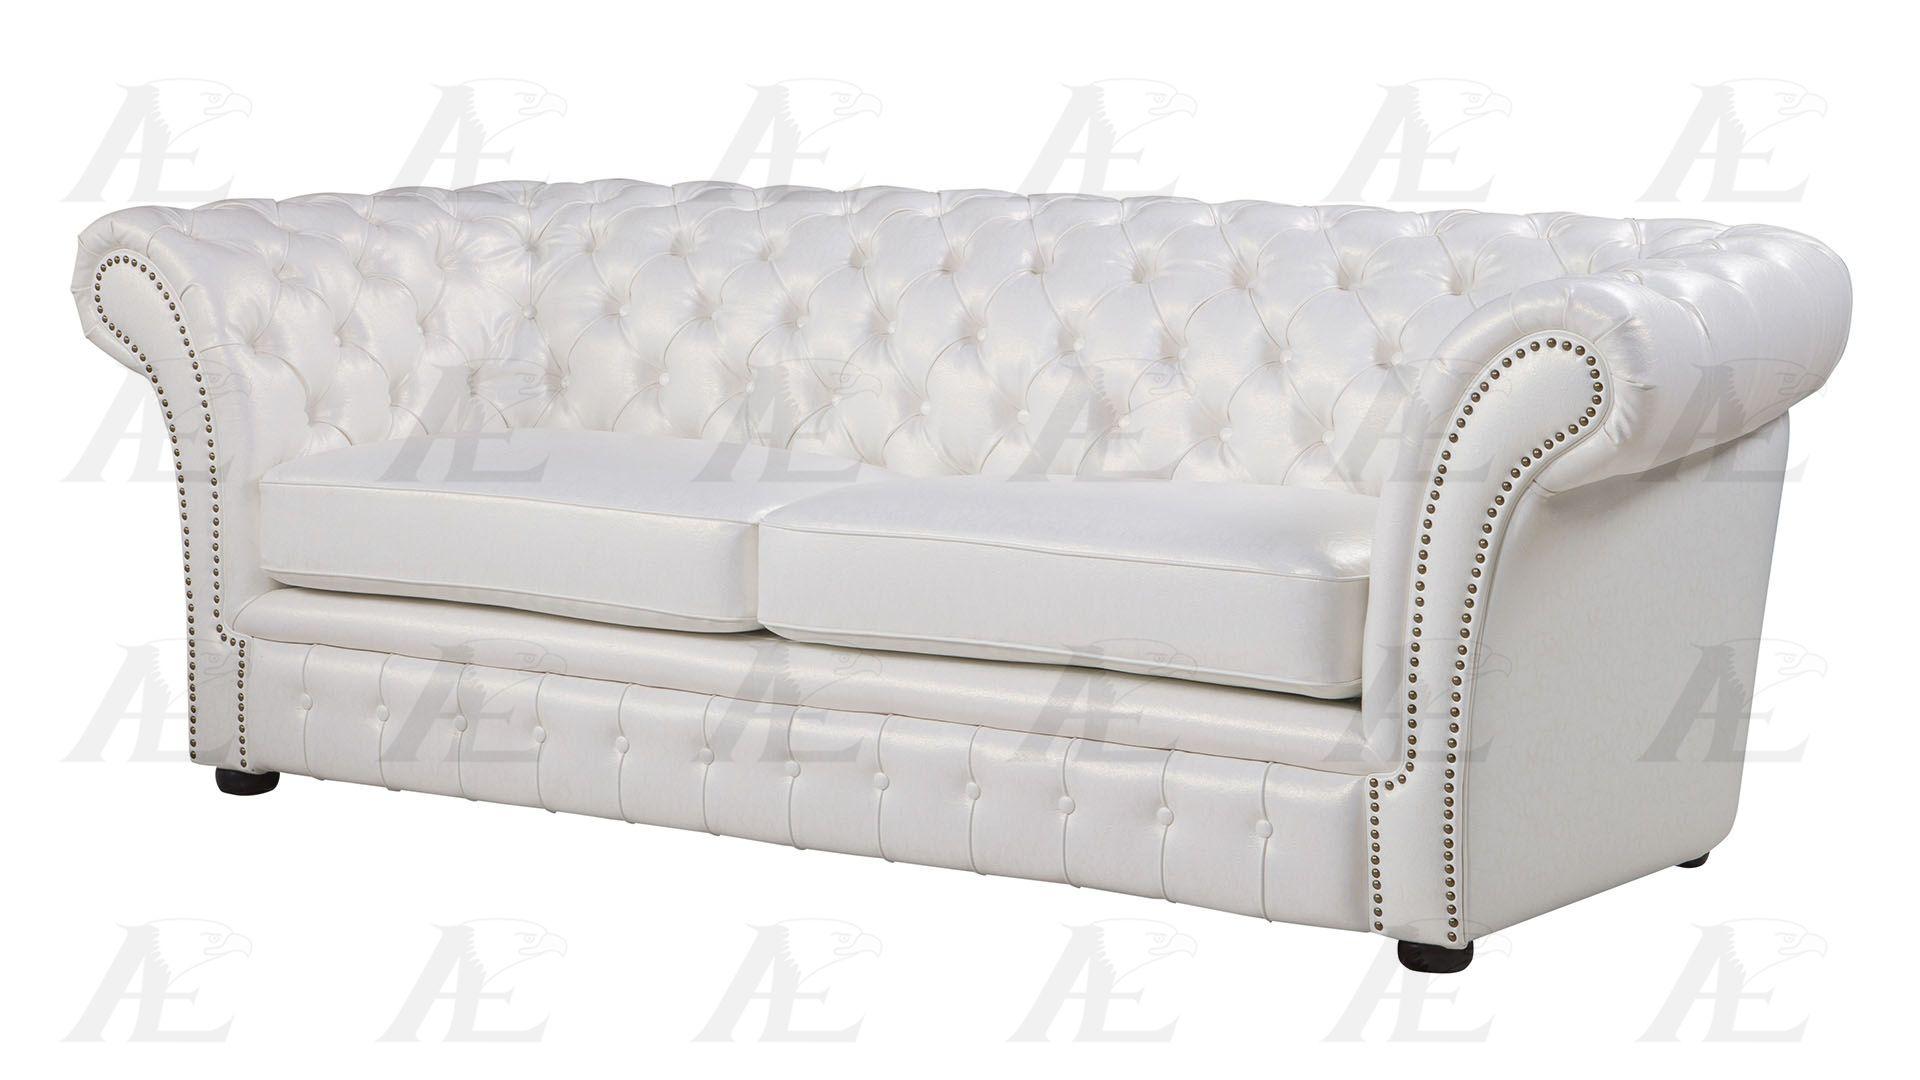 

                    
American Eagle Furniture AE508-IV Sofa and Loveseat Set Ivory Bonded Leather Purchase 
